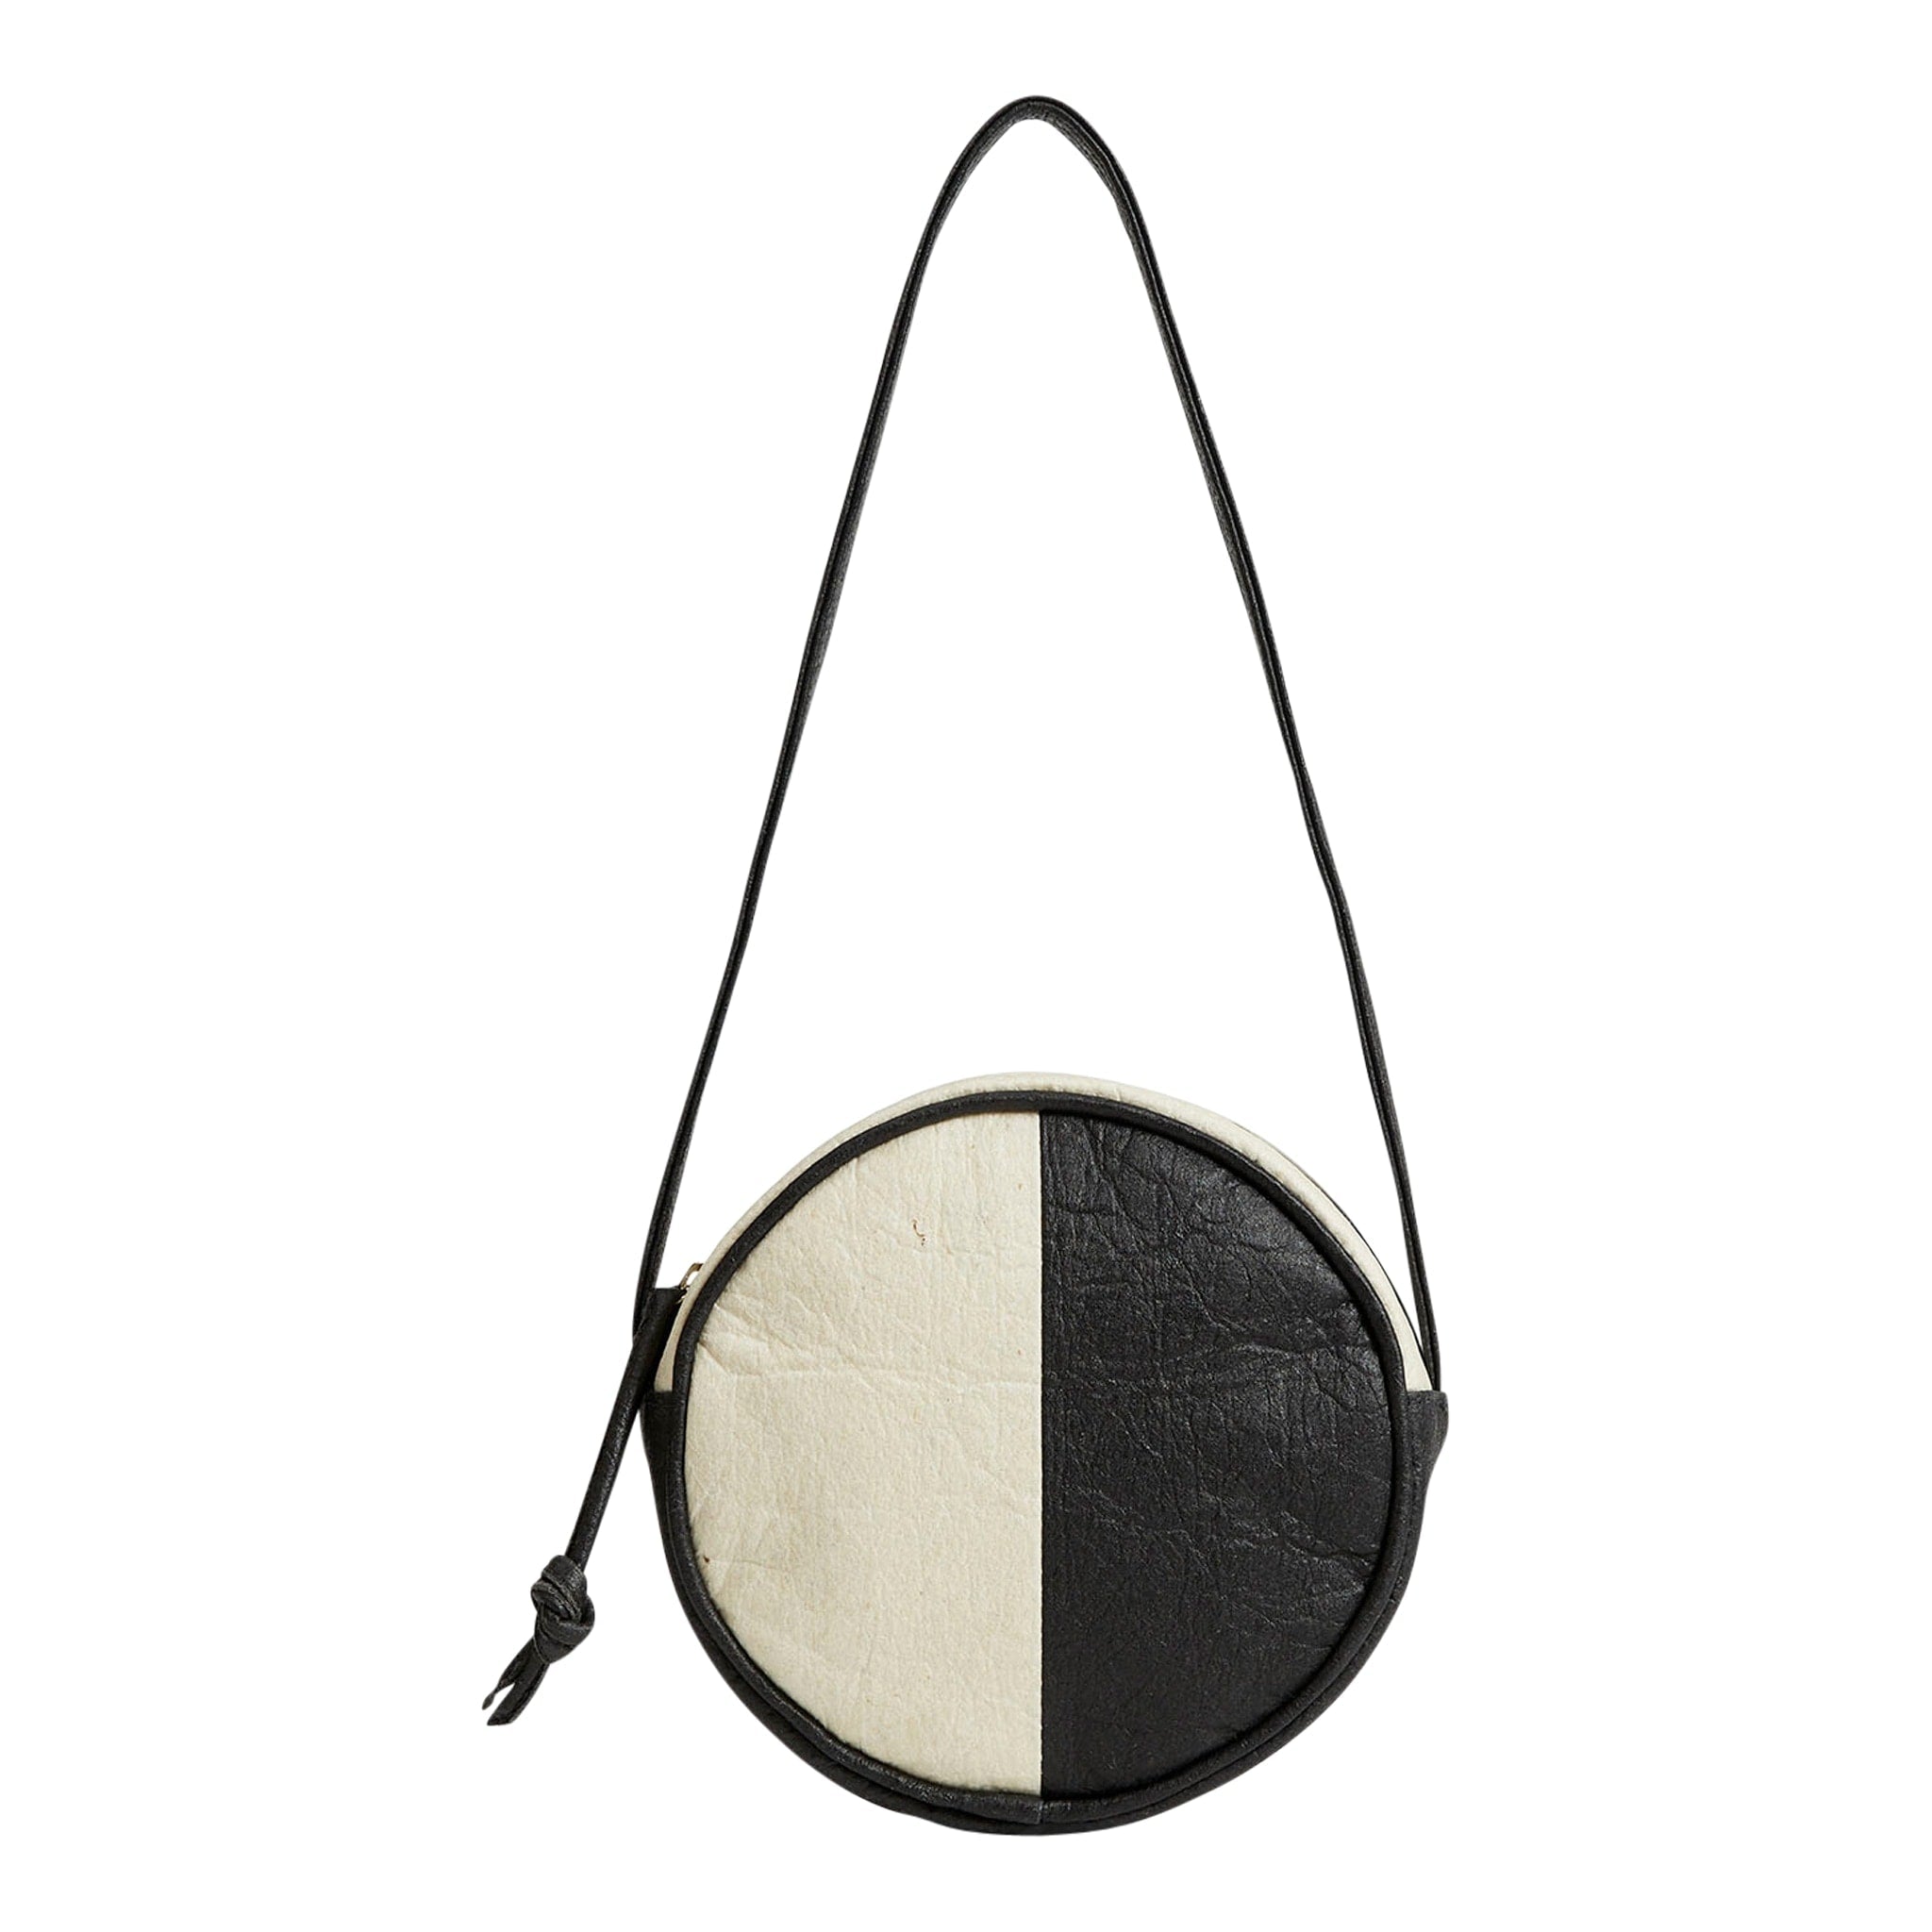 Pineapple leather two-toned black and white circle shoulder bag.